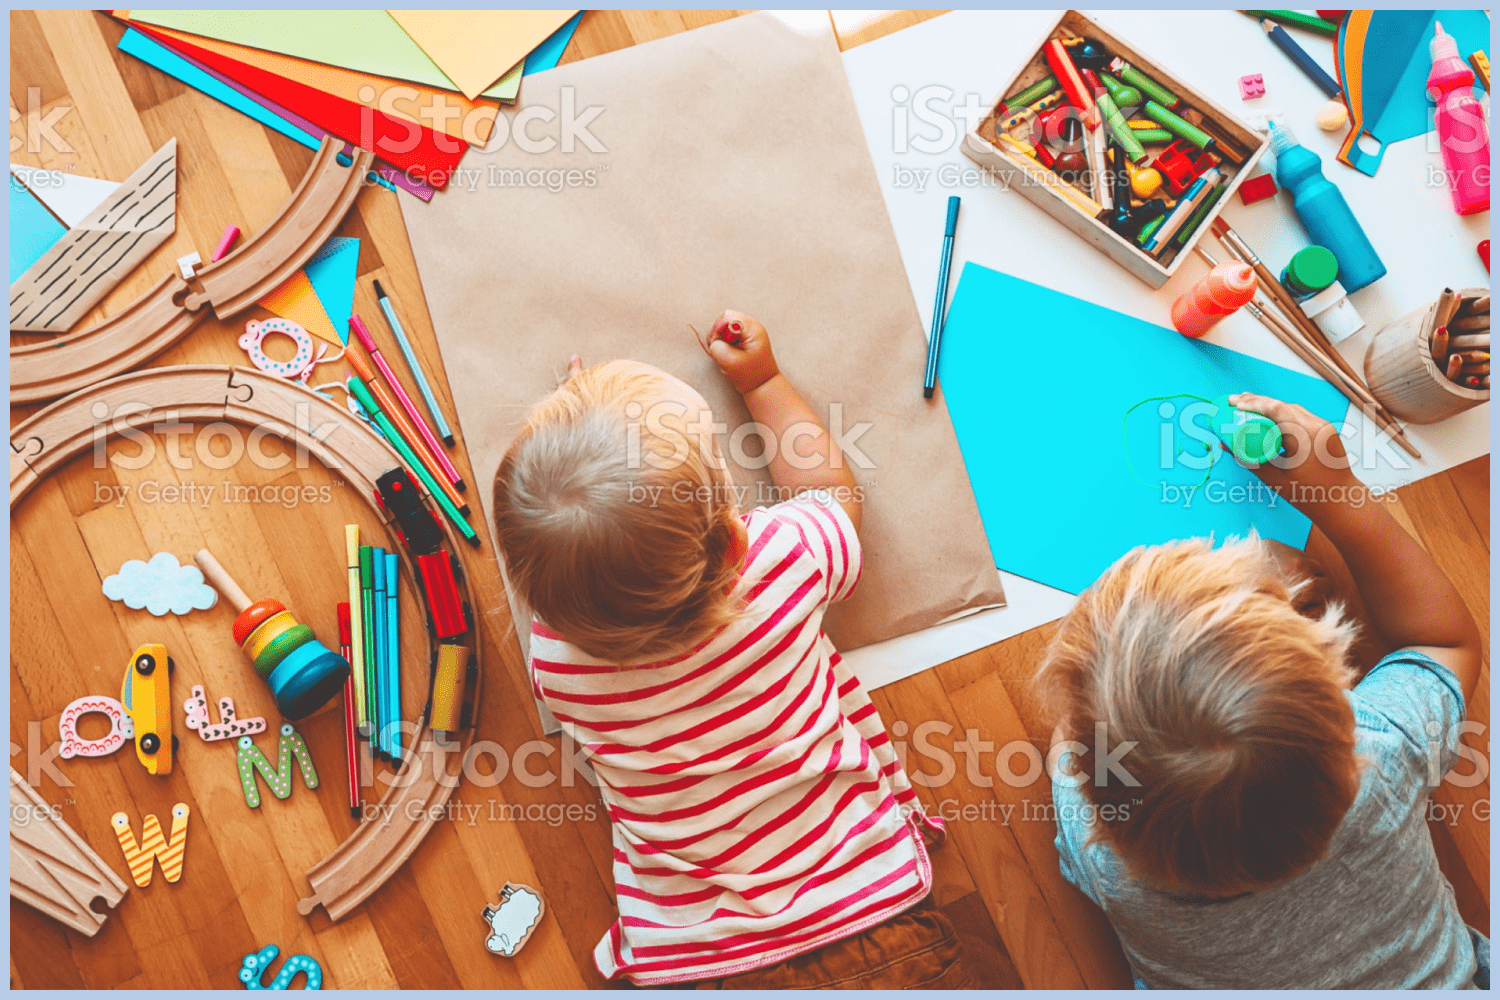 Two kids are drawing with pencils.